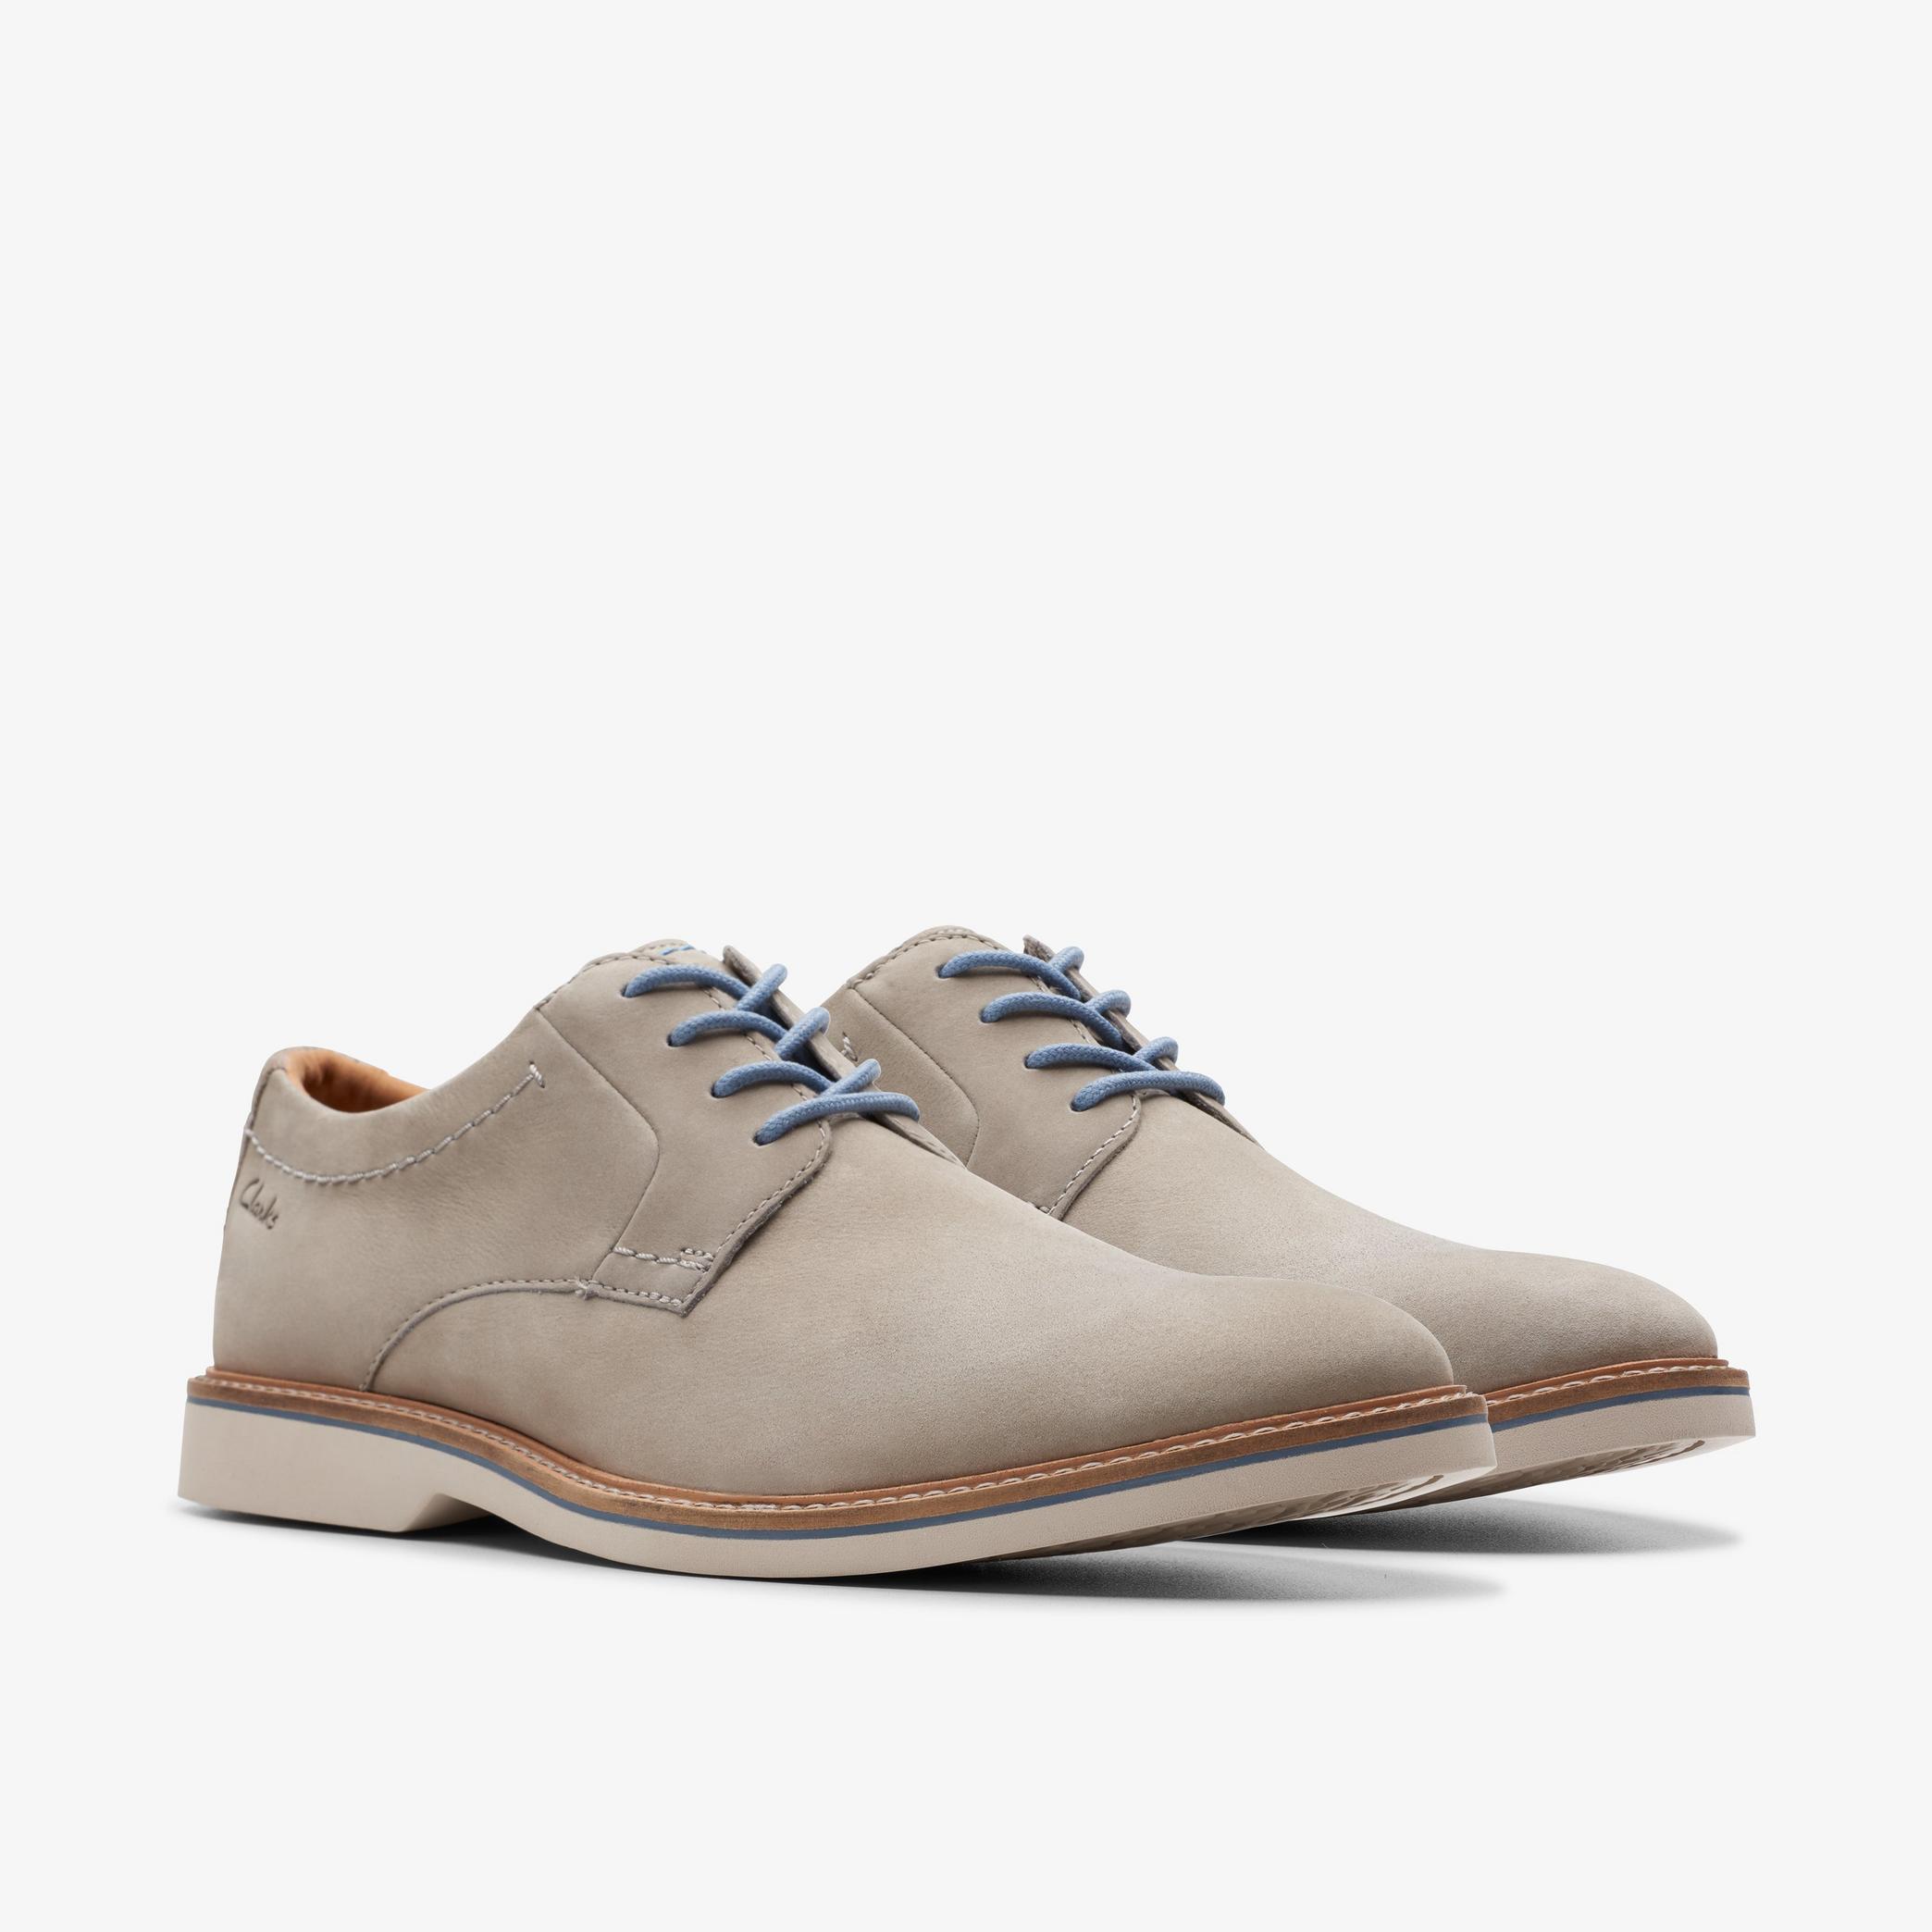 Atticus LT Lace Grey Nubuck Oxford Shoes, view 4 of 11